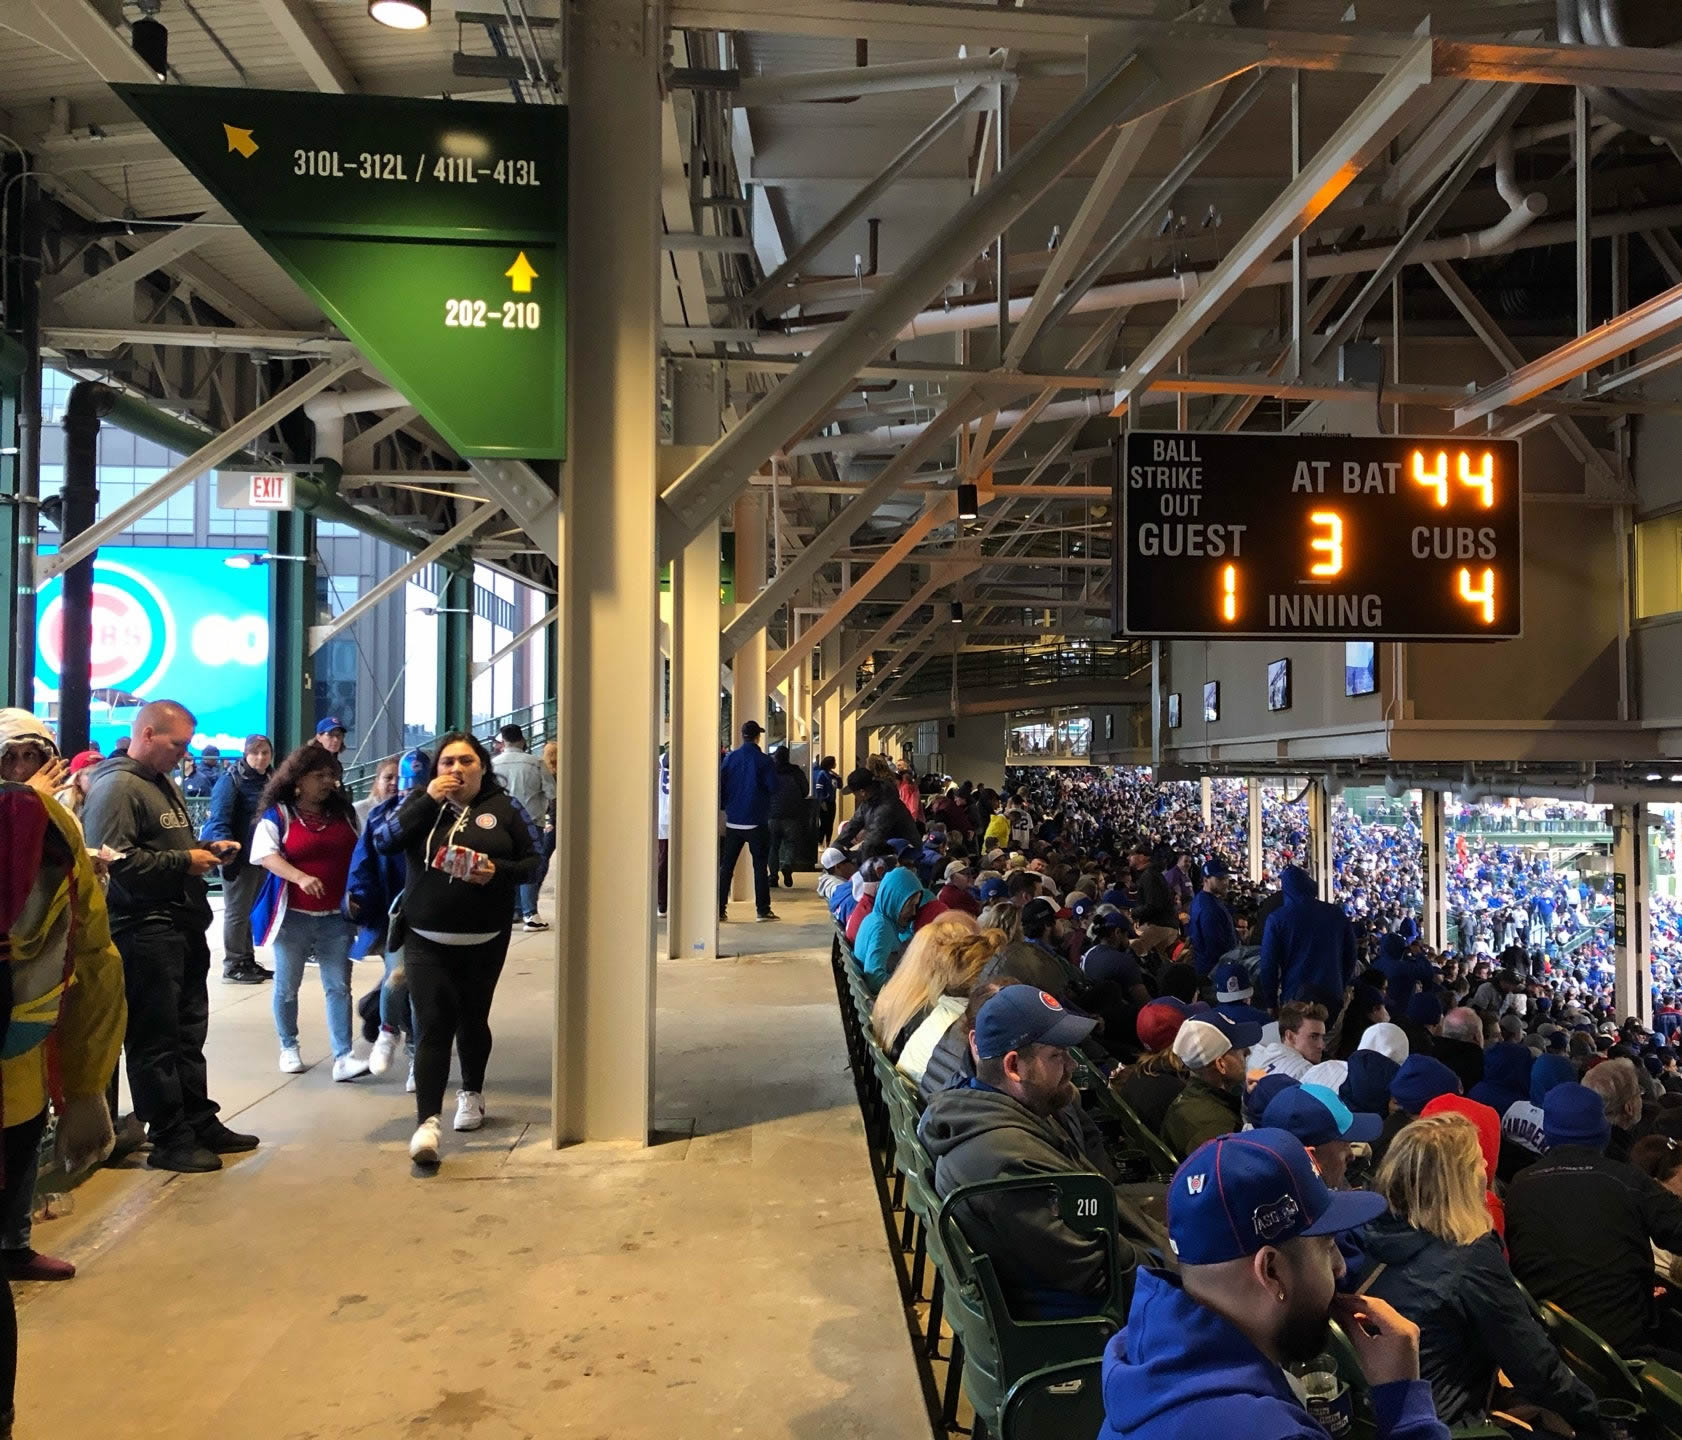 cubs standing room only